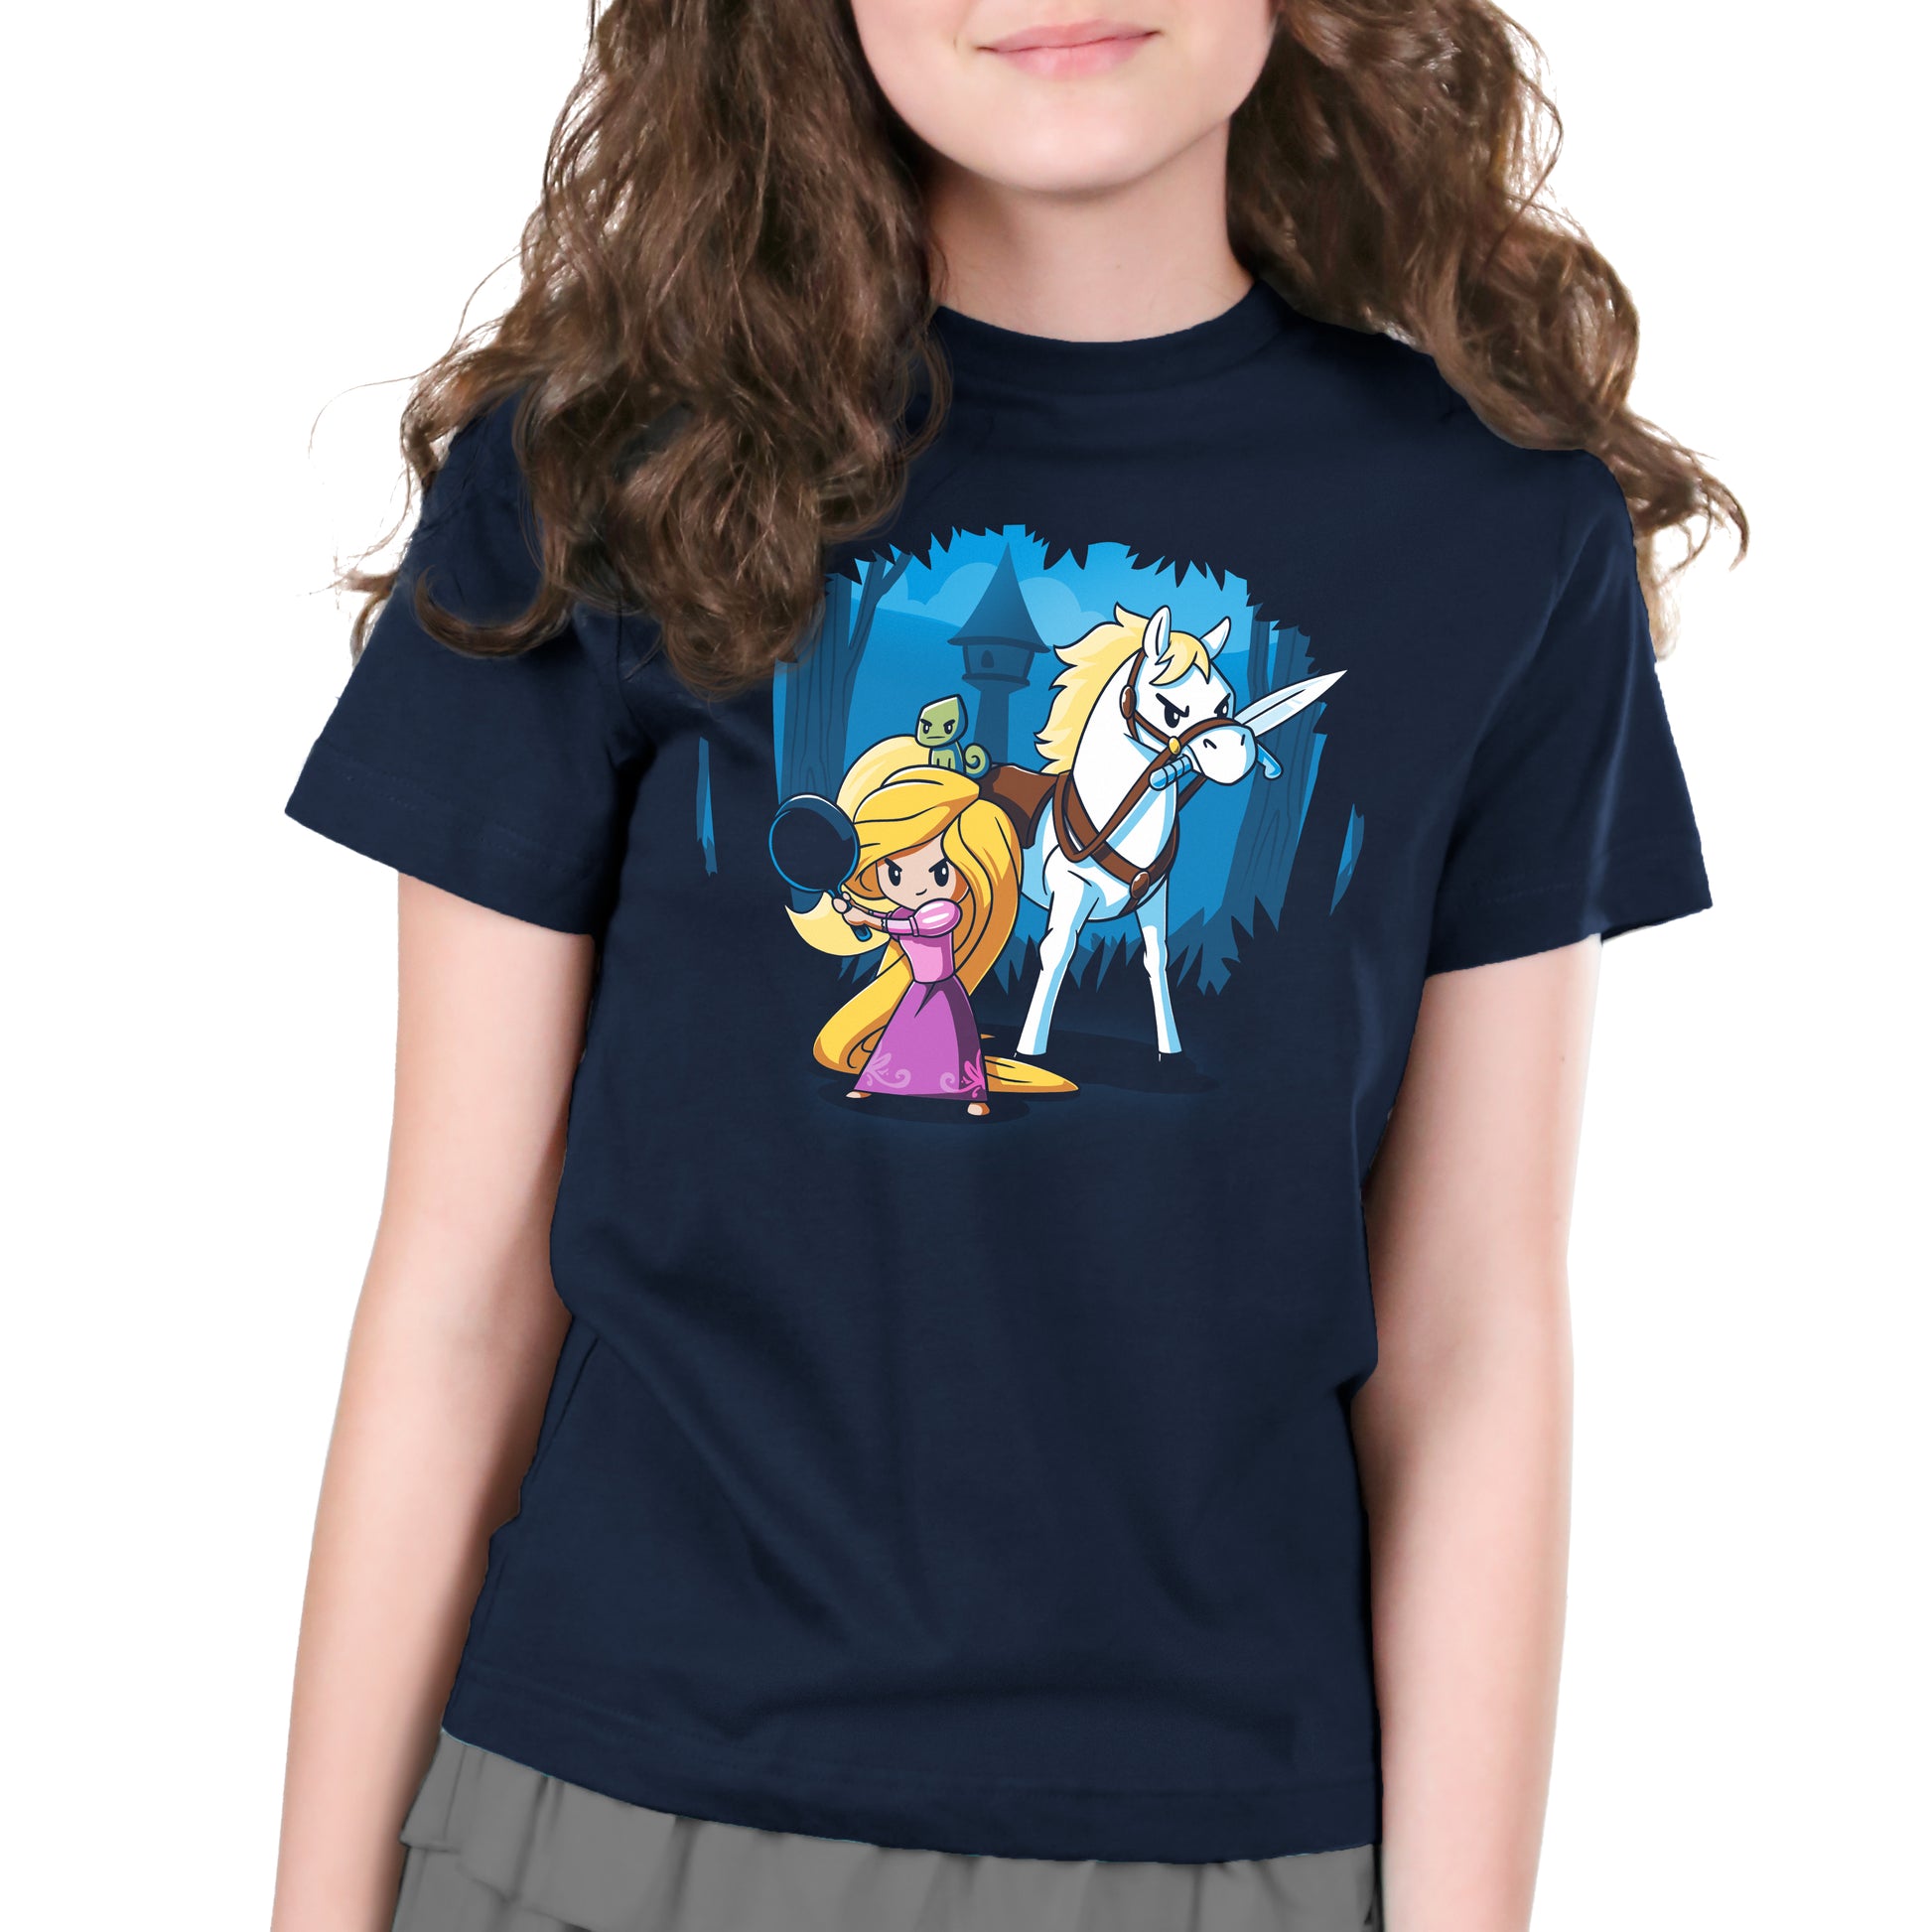 A young girl wearing an officially licensed Disney Rapunzel's Adventure t-shirt with an image of a princess and a unicorn.